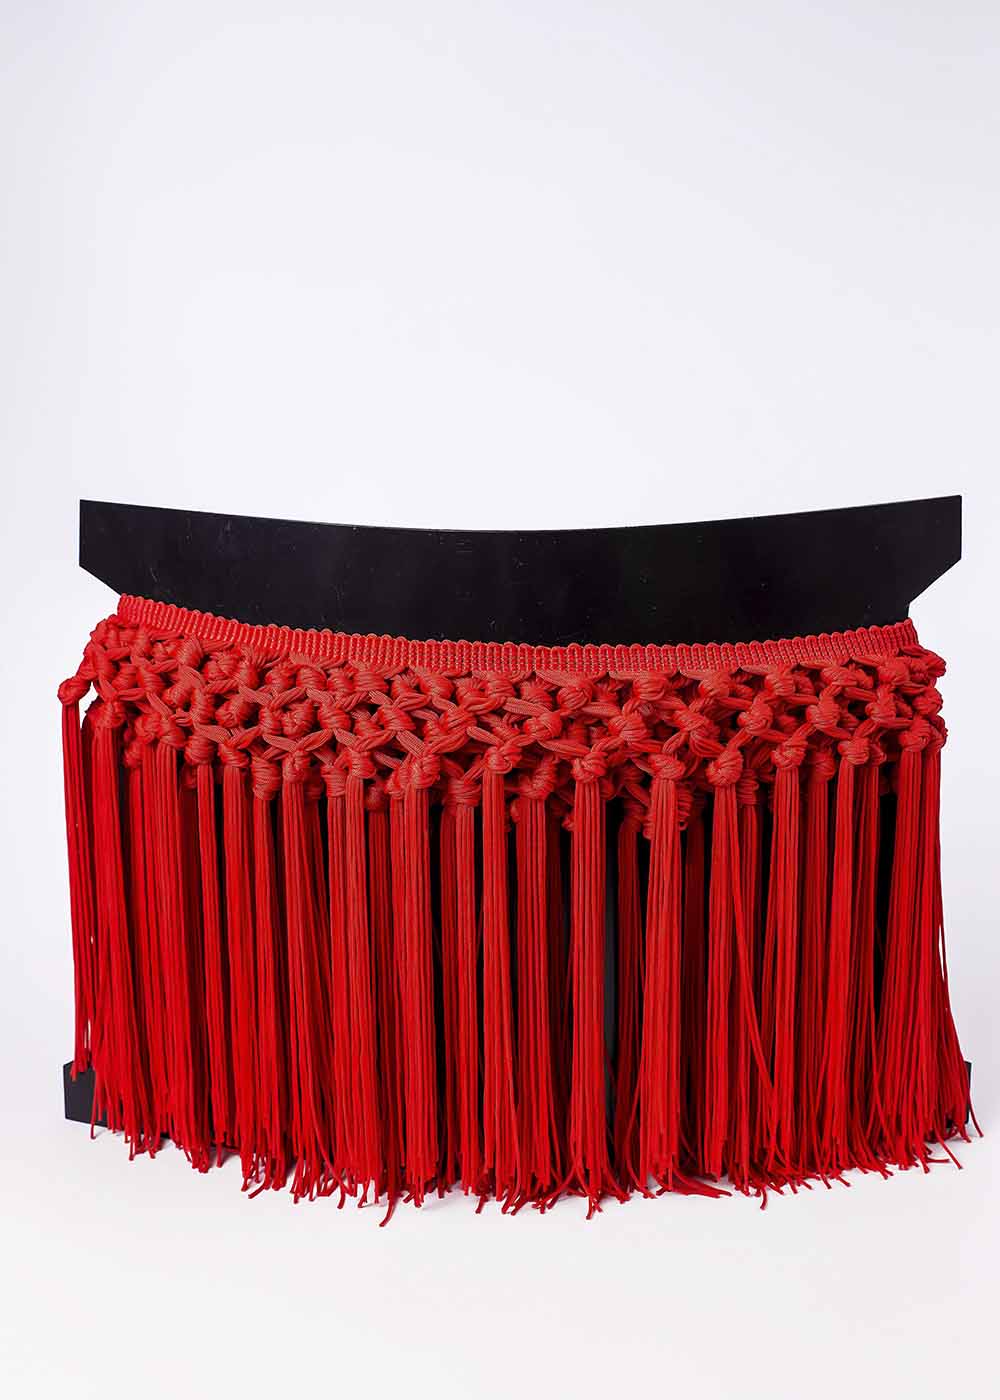 Knotted dance fringe to buy at the Grand Prix store